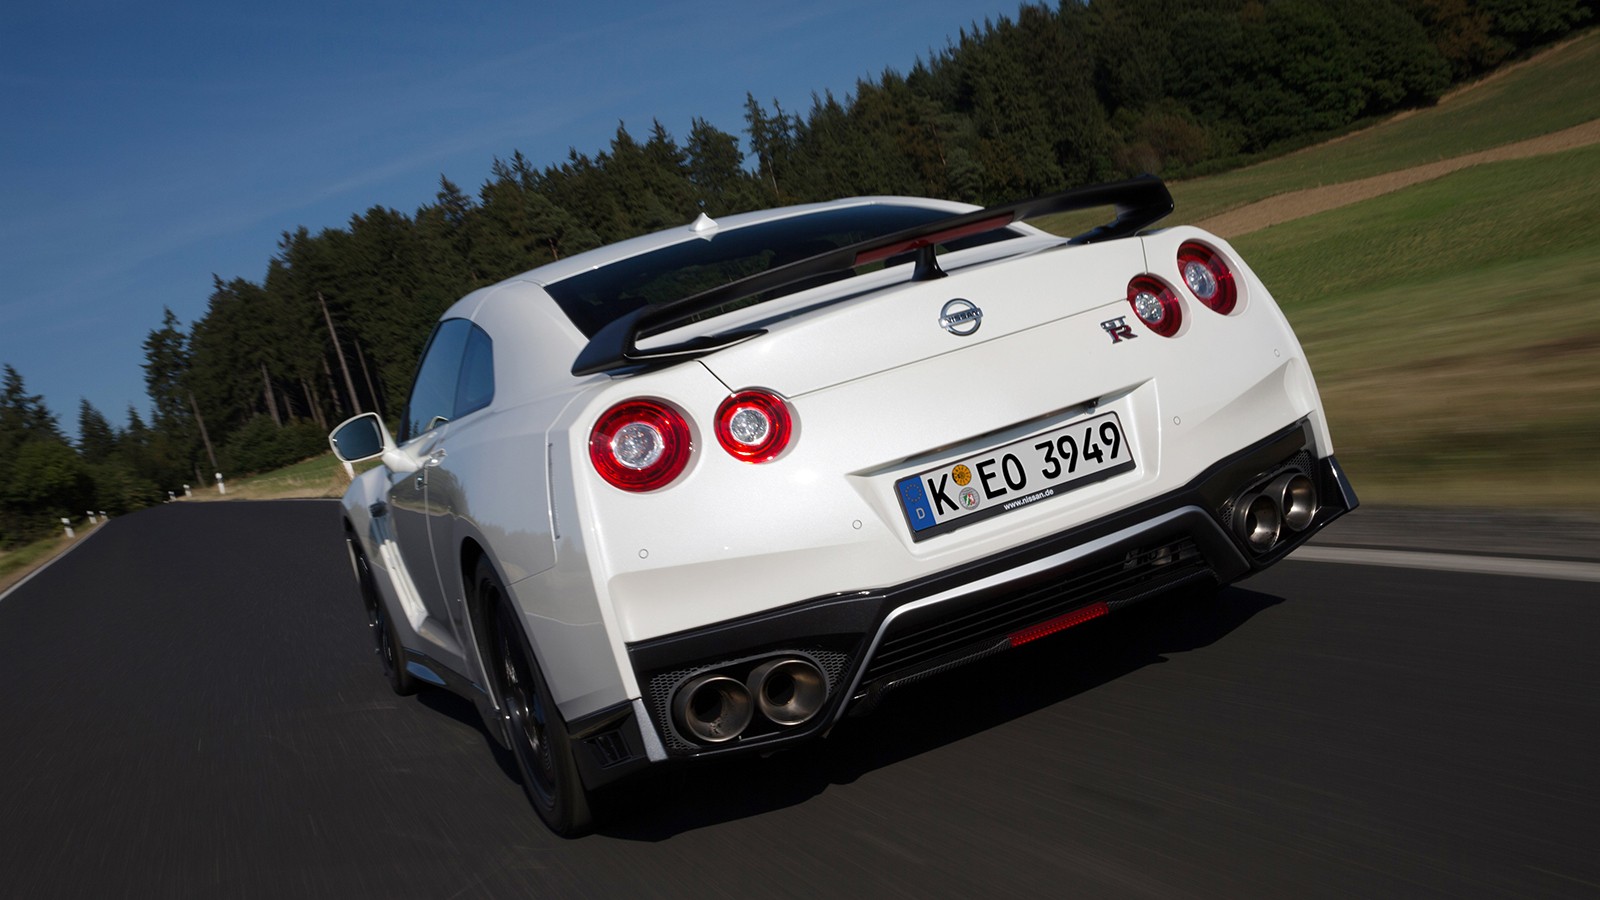 Nissan reveals full specs and pricing for thrilling new GT-R Tra